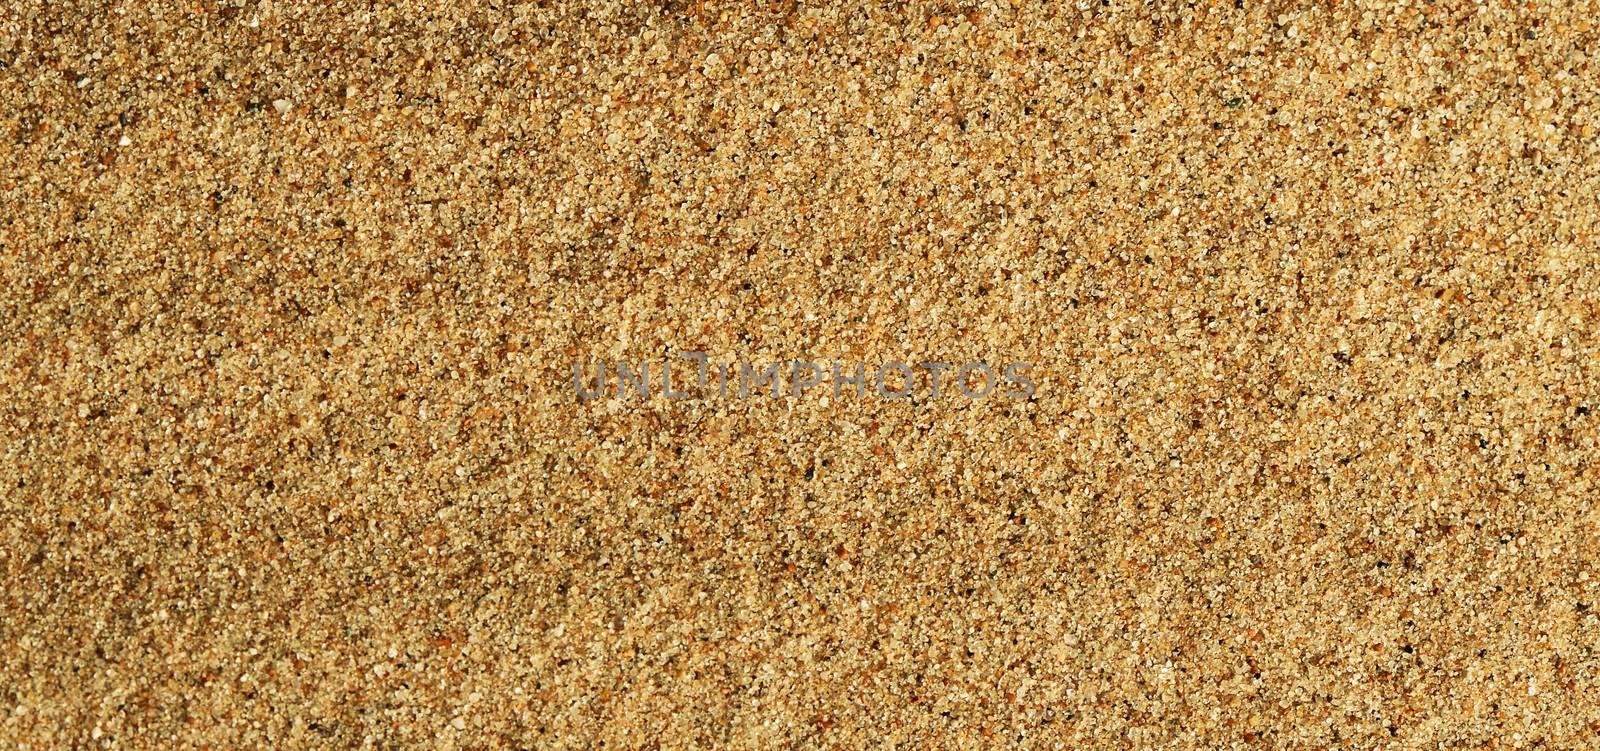 Sand texture as a background. Close up